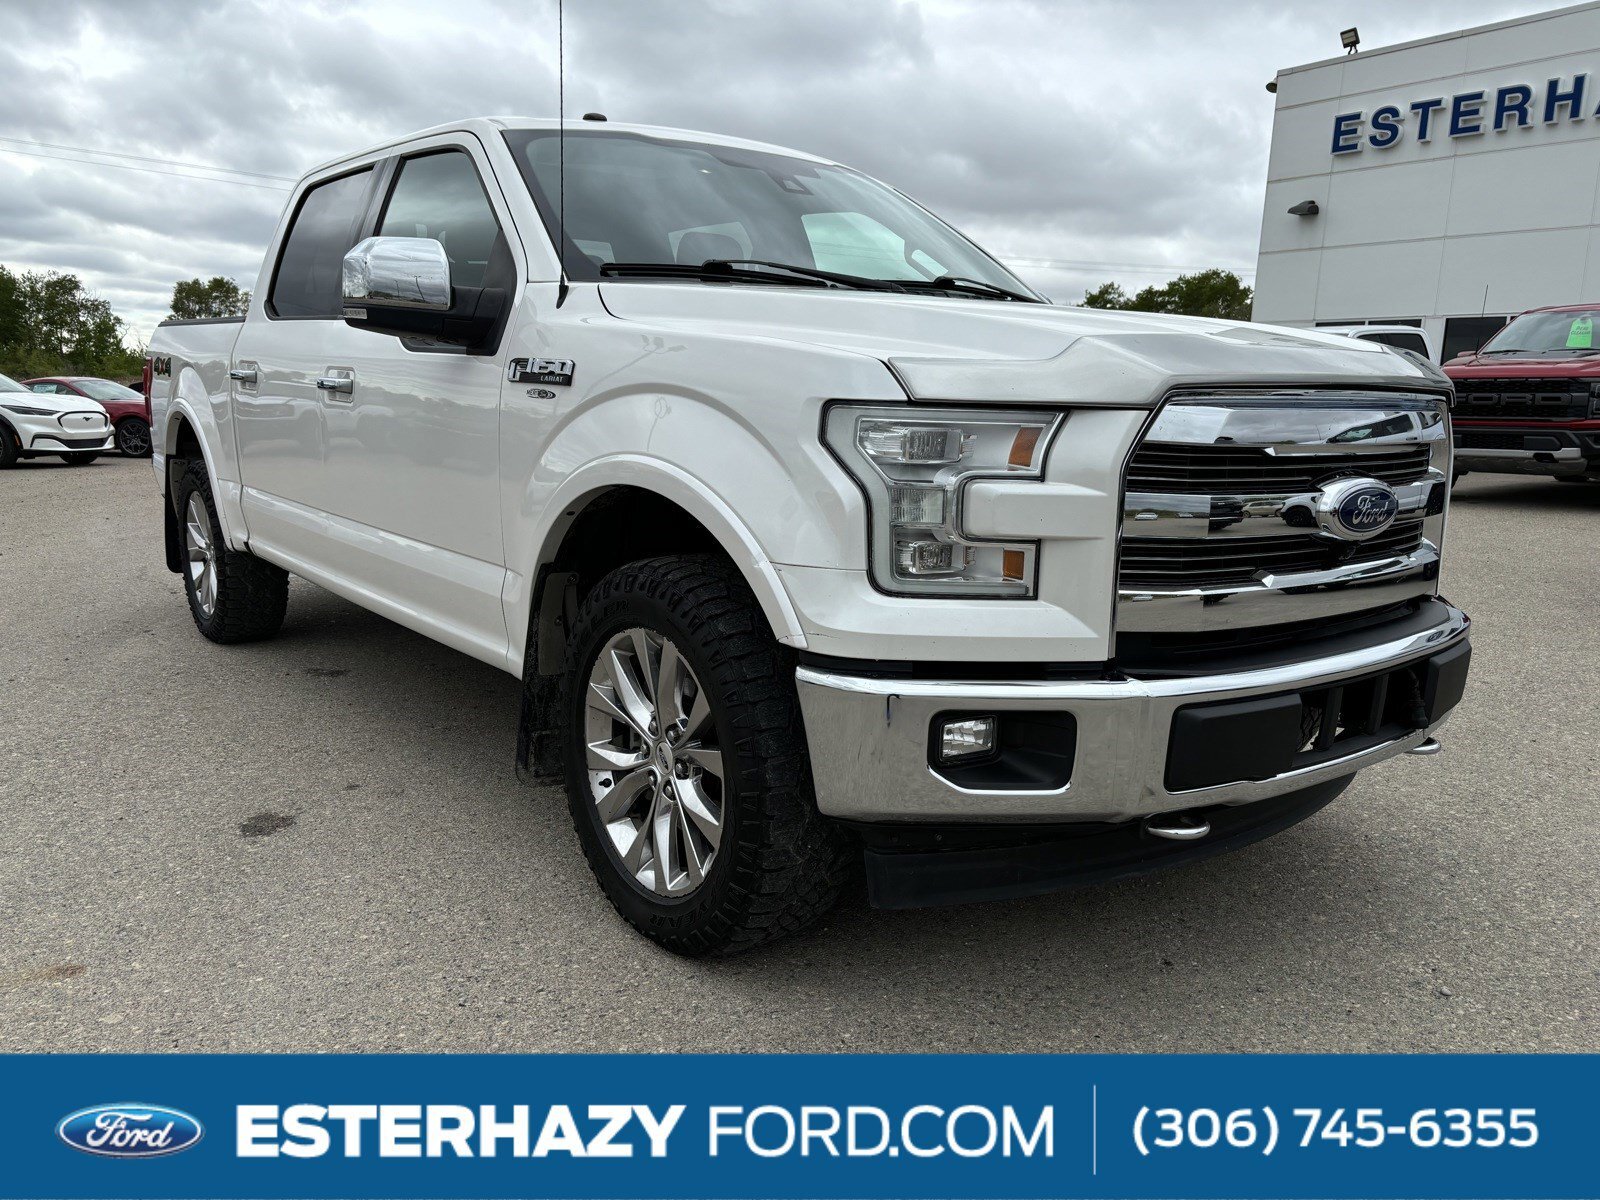 2017 Ford F-150 LARIAT | HEATED AND COOLED SEATS | REMOTE START | 